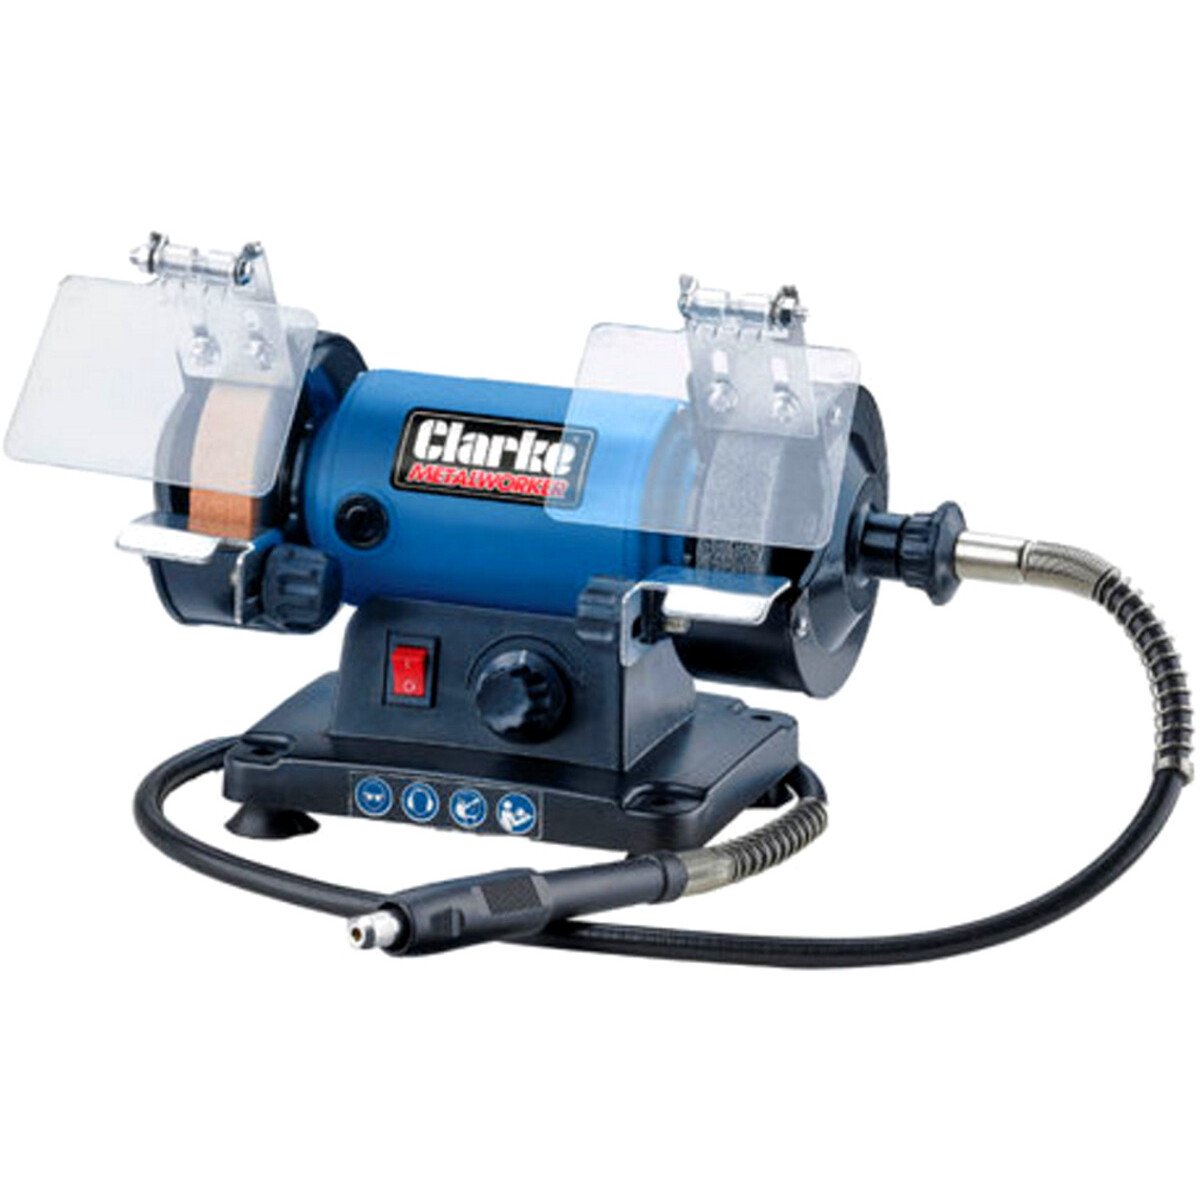 Clarke CGP75F 3” Mini Grinder/Polisher with Flexible Drive Shaft Assembly  Kit 6500072 from Lawson HIS